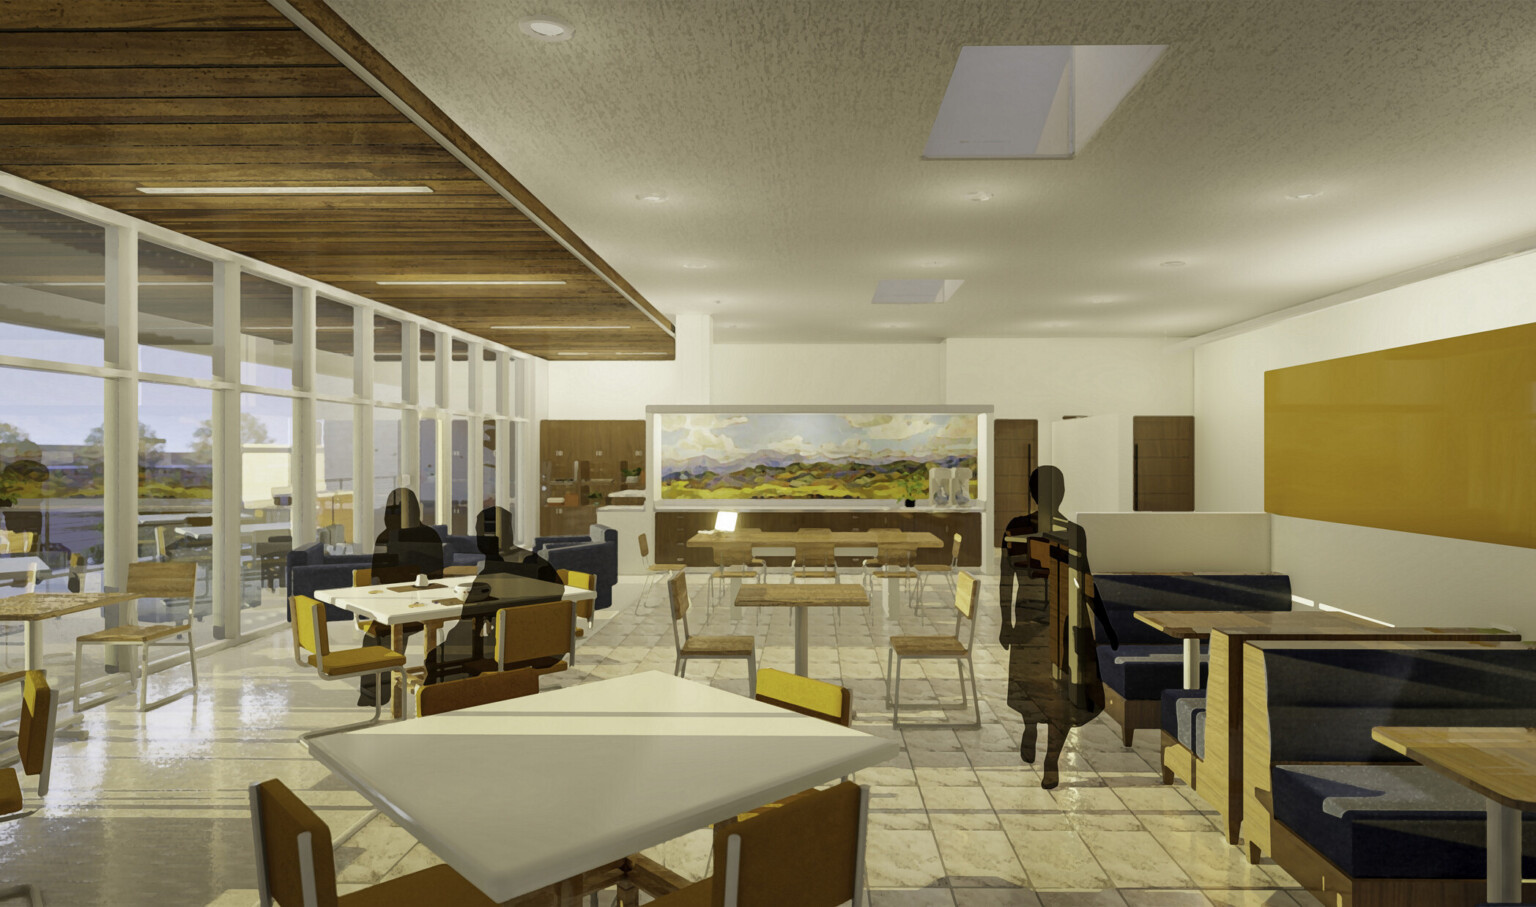 Larimer County Jail Improvement Rendering of dining space with mixed seating and large windows to nature